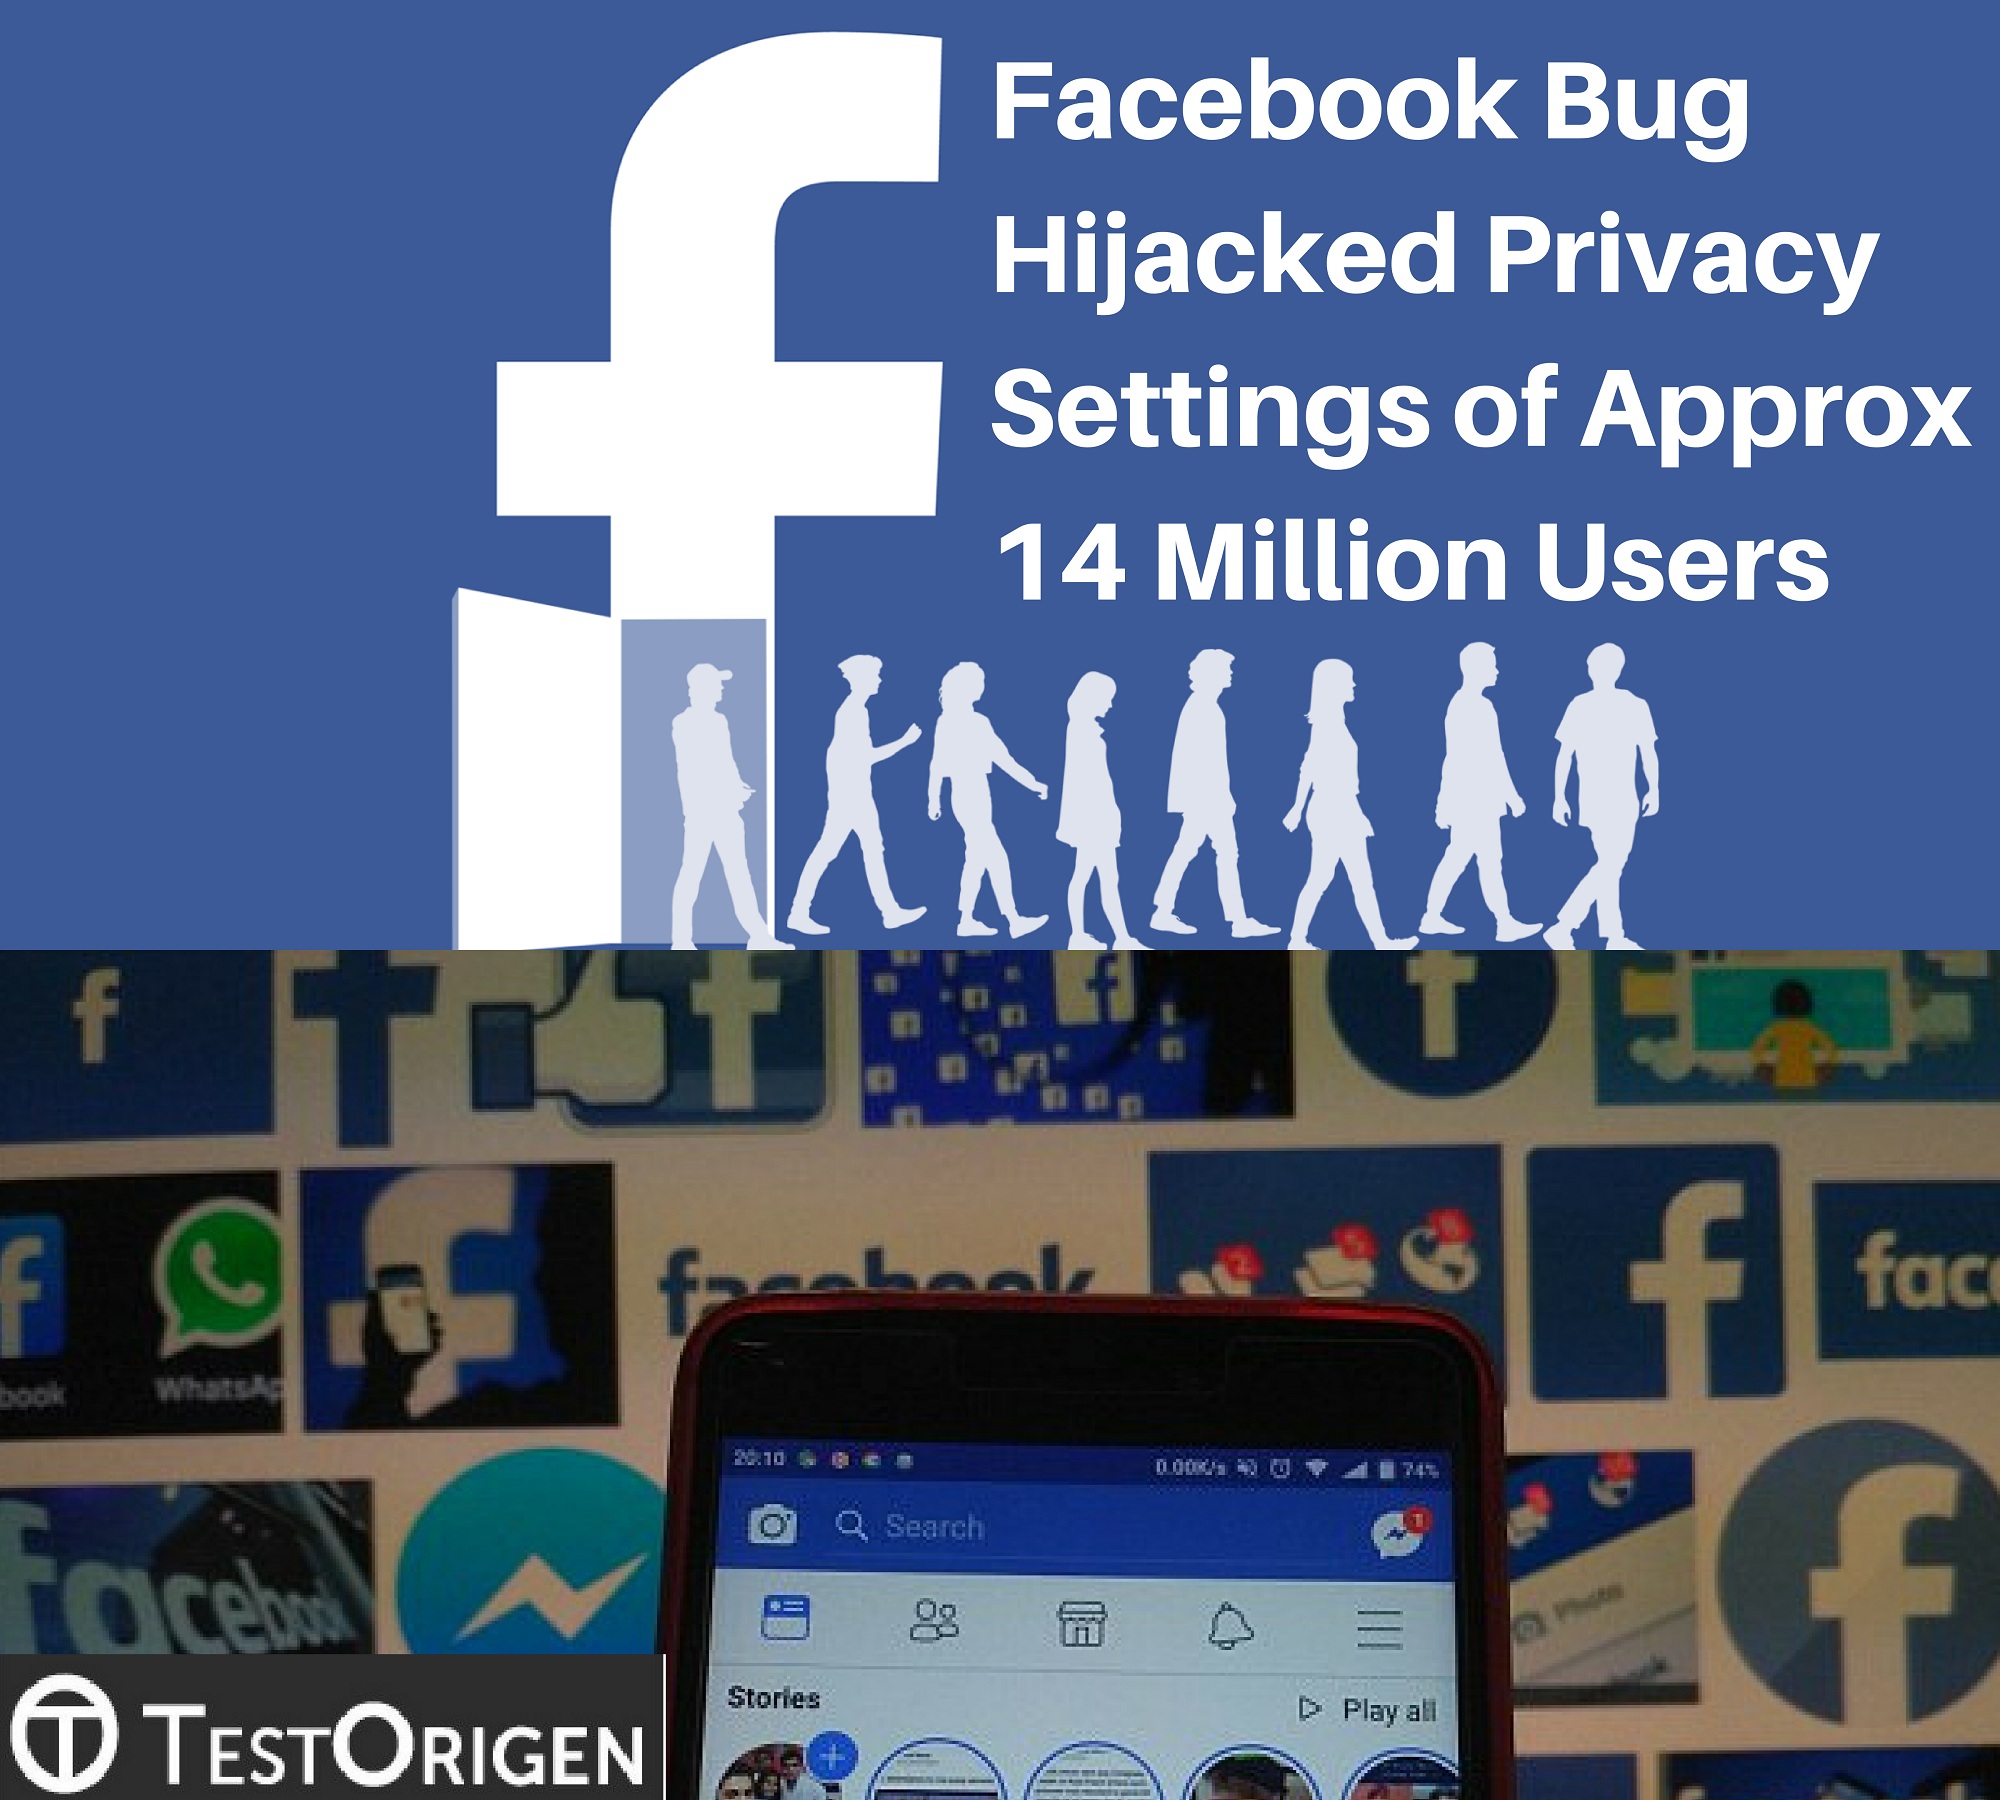 Facebook Bug Hijacked Privacy Settings of Approx 14 Million Users